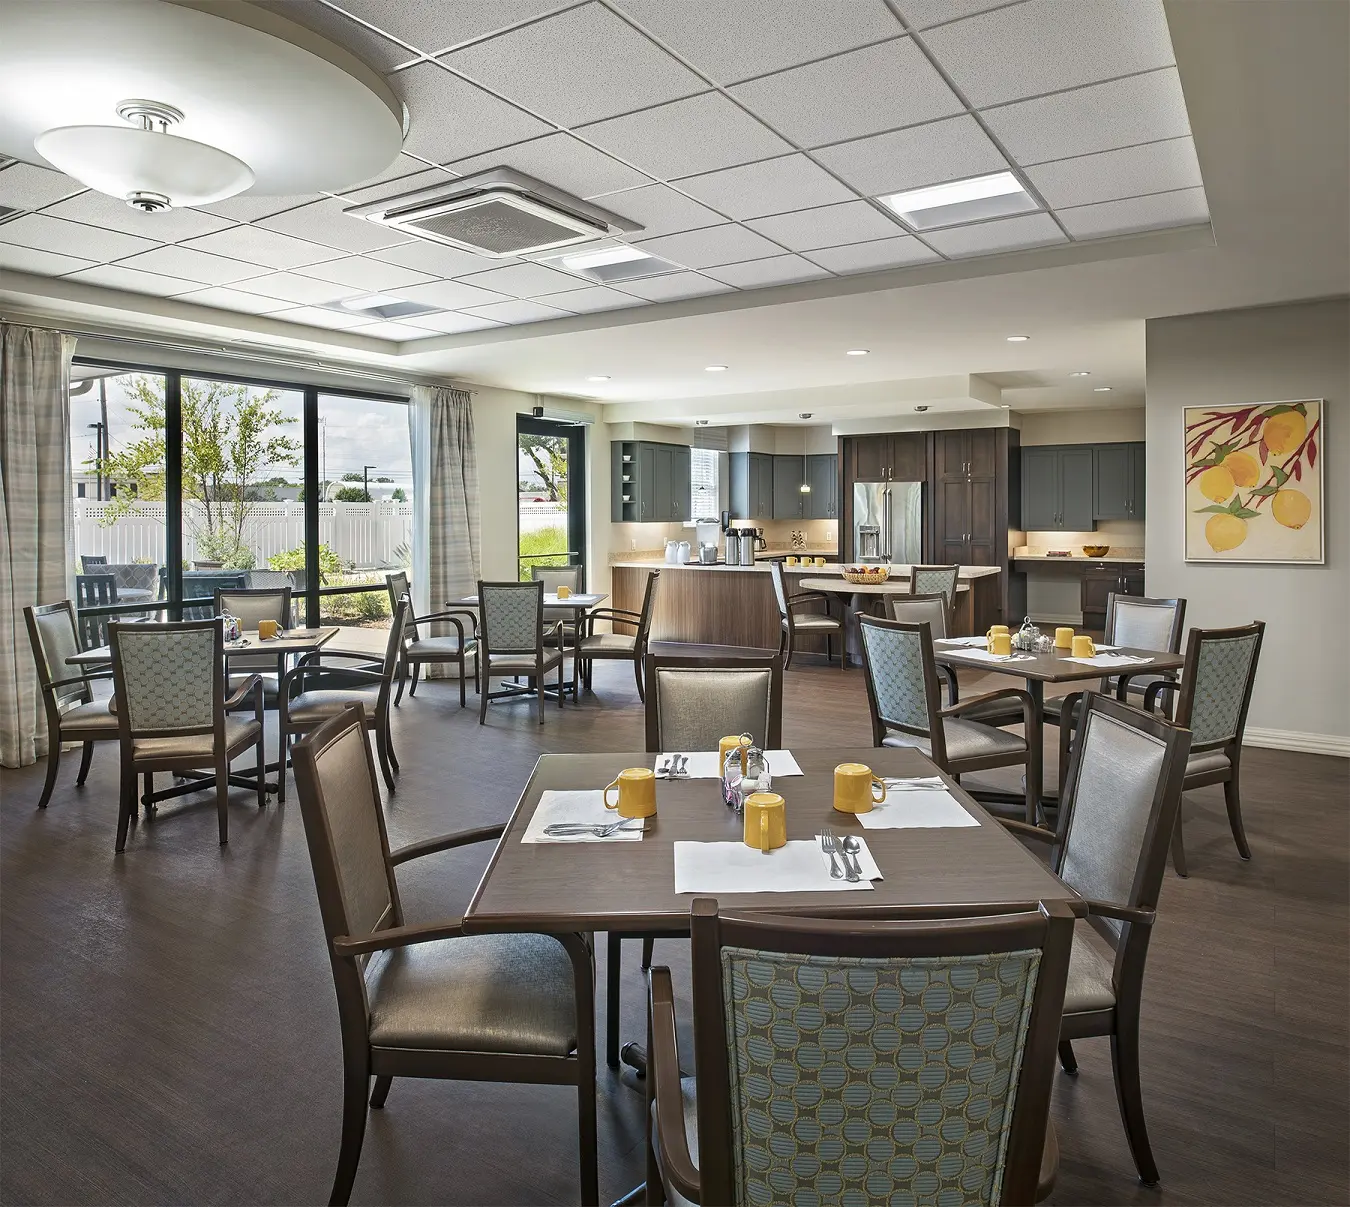 Dining area at American House Freedom Place Roseville, a memory care community in Roseville, Michigan